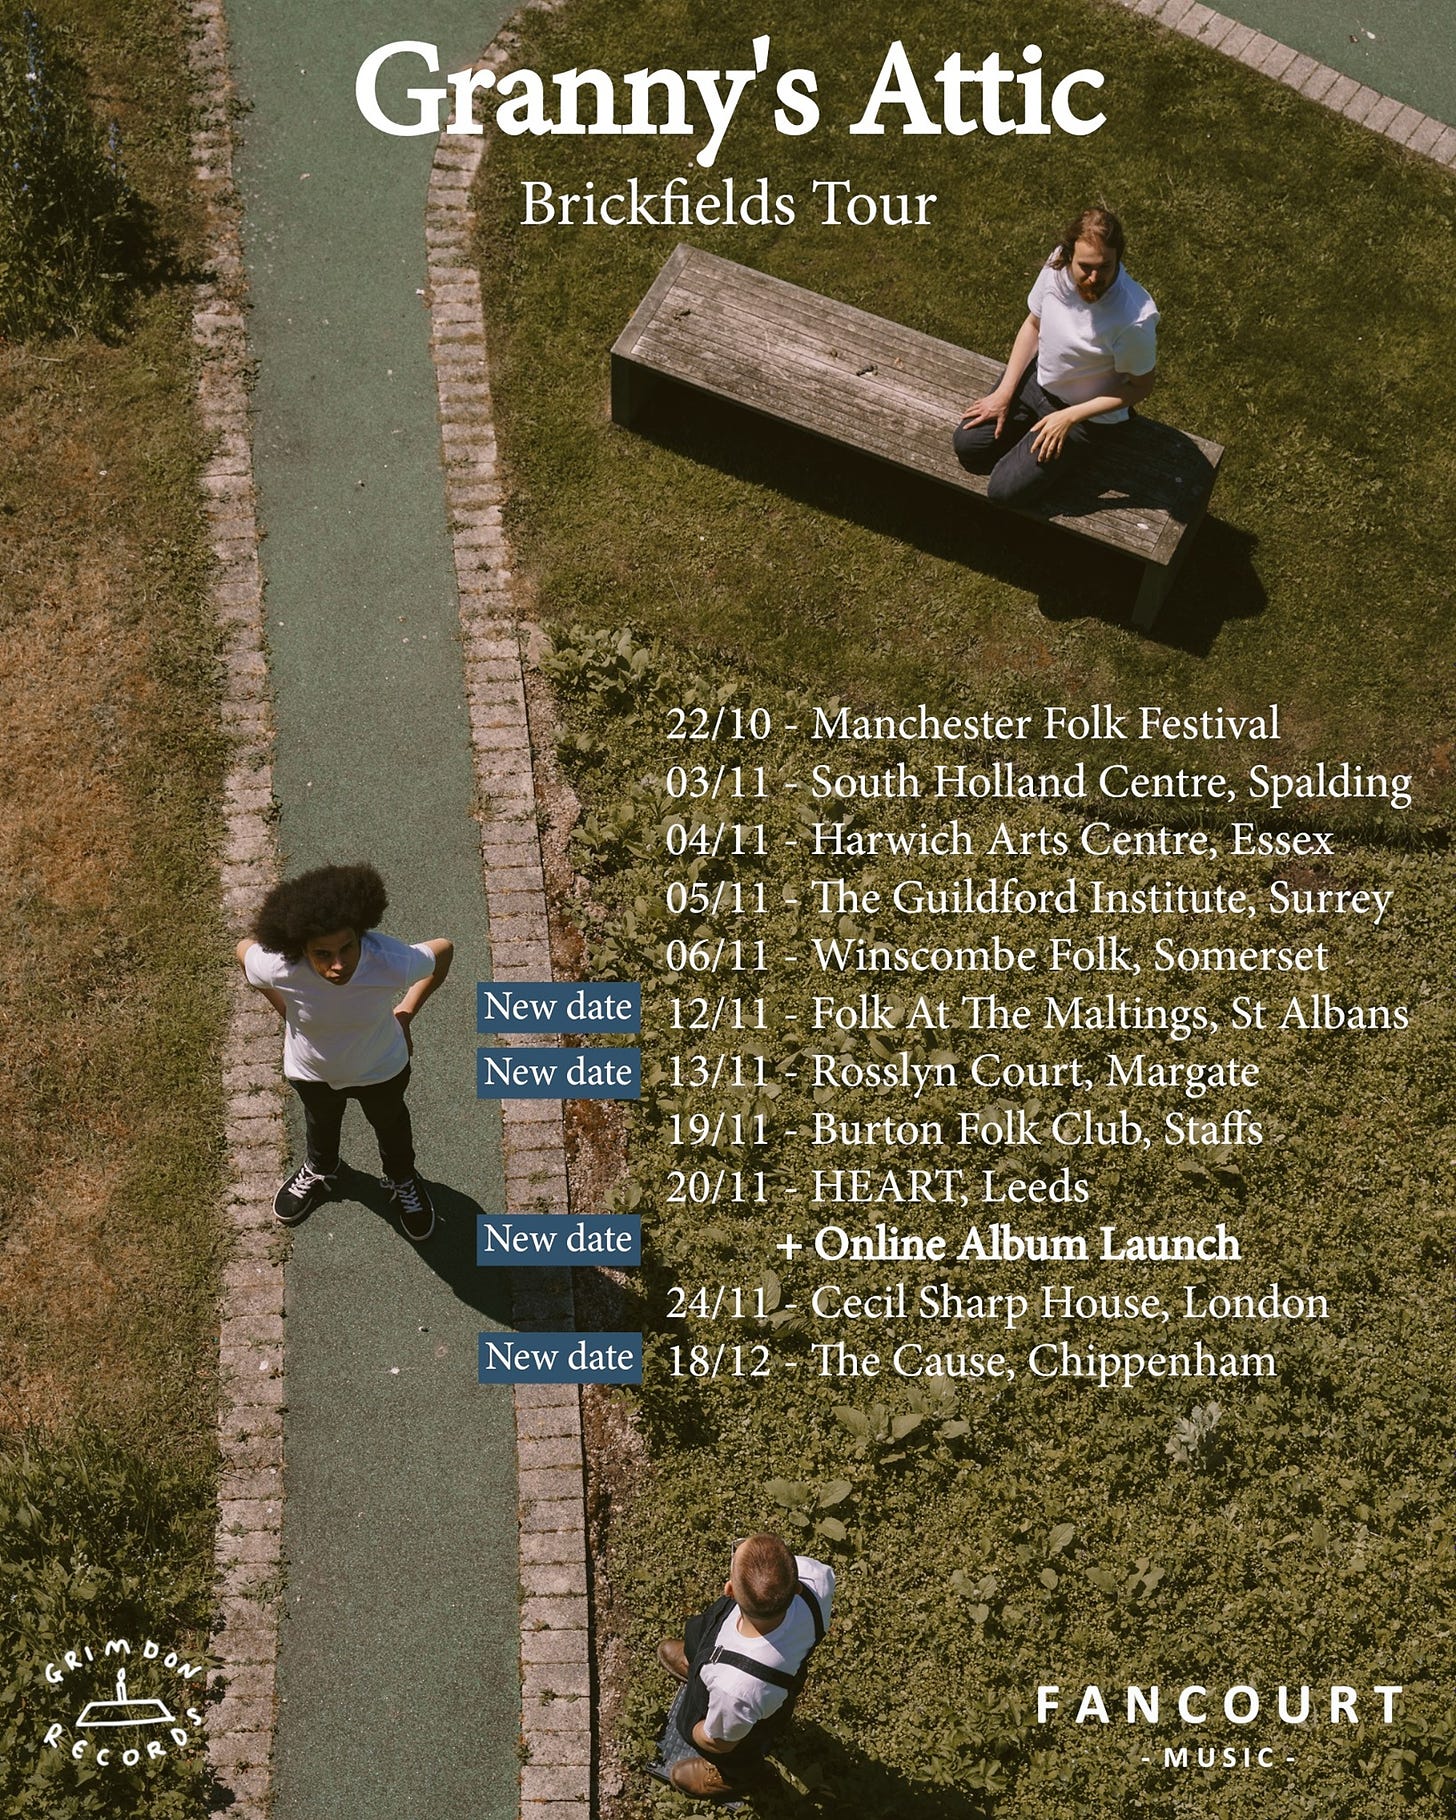 May be an image of outdoors and text that says "Granny's Attic Brickfields Tour New date 22/10- Manchester Folk Festival 03/11- South Holland Centre, Spalding 04/11 Harwich Arts Centre, Essex 05/11 The Guildford Institute, Surrey 06/11- Winscombe Folk, Somerset 12/11 Folk At The Maltings, St Albans New date 13/11 Rosslyn Court, Margate 19/11 Burton Folk Club, Staffs 20/11 HEART, Leeds Online Album Launch 24/11 Cecil Sharp House, London 18/12 The Cause, Chippenham New date New date 3 RECOR FANCOURT MUSIC"